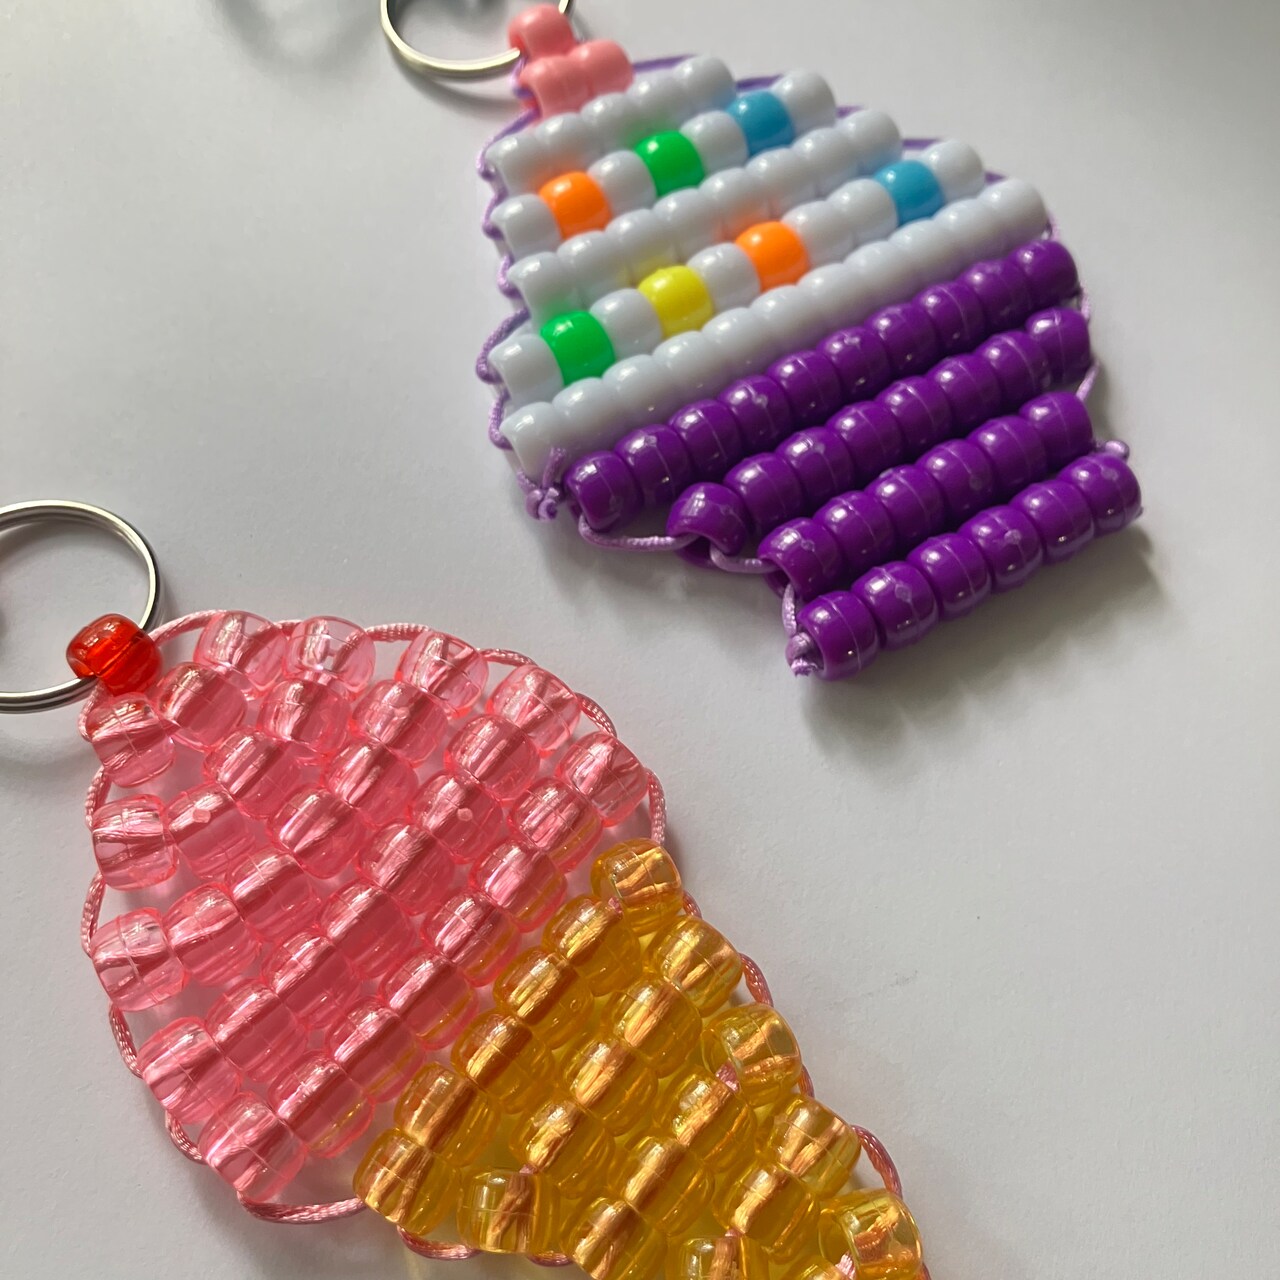 Online Class: Kids Club Pony Bead Backpack Pull or Keychain with